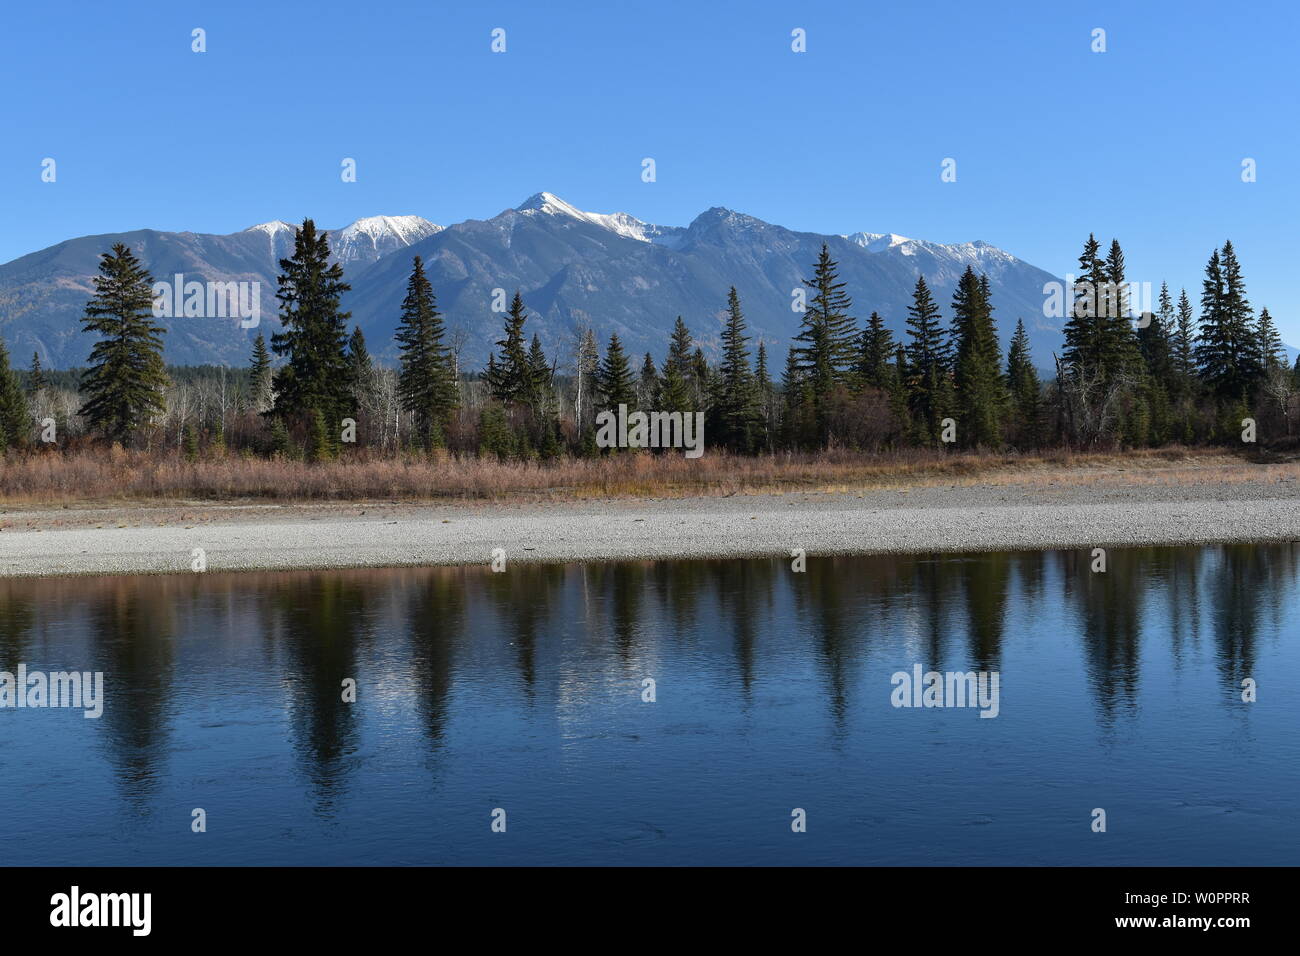 Mountains and trees reflecting in the Kootenay River, BC, Canada Stock Photo